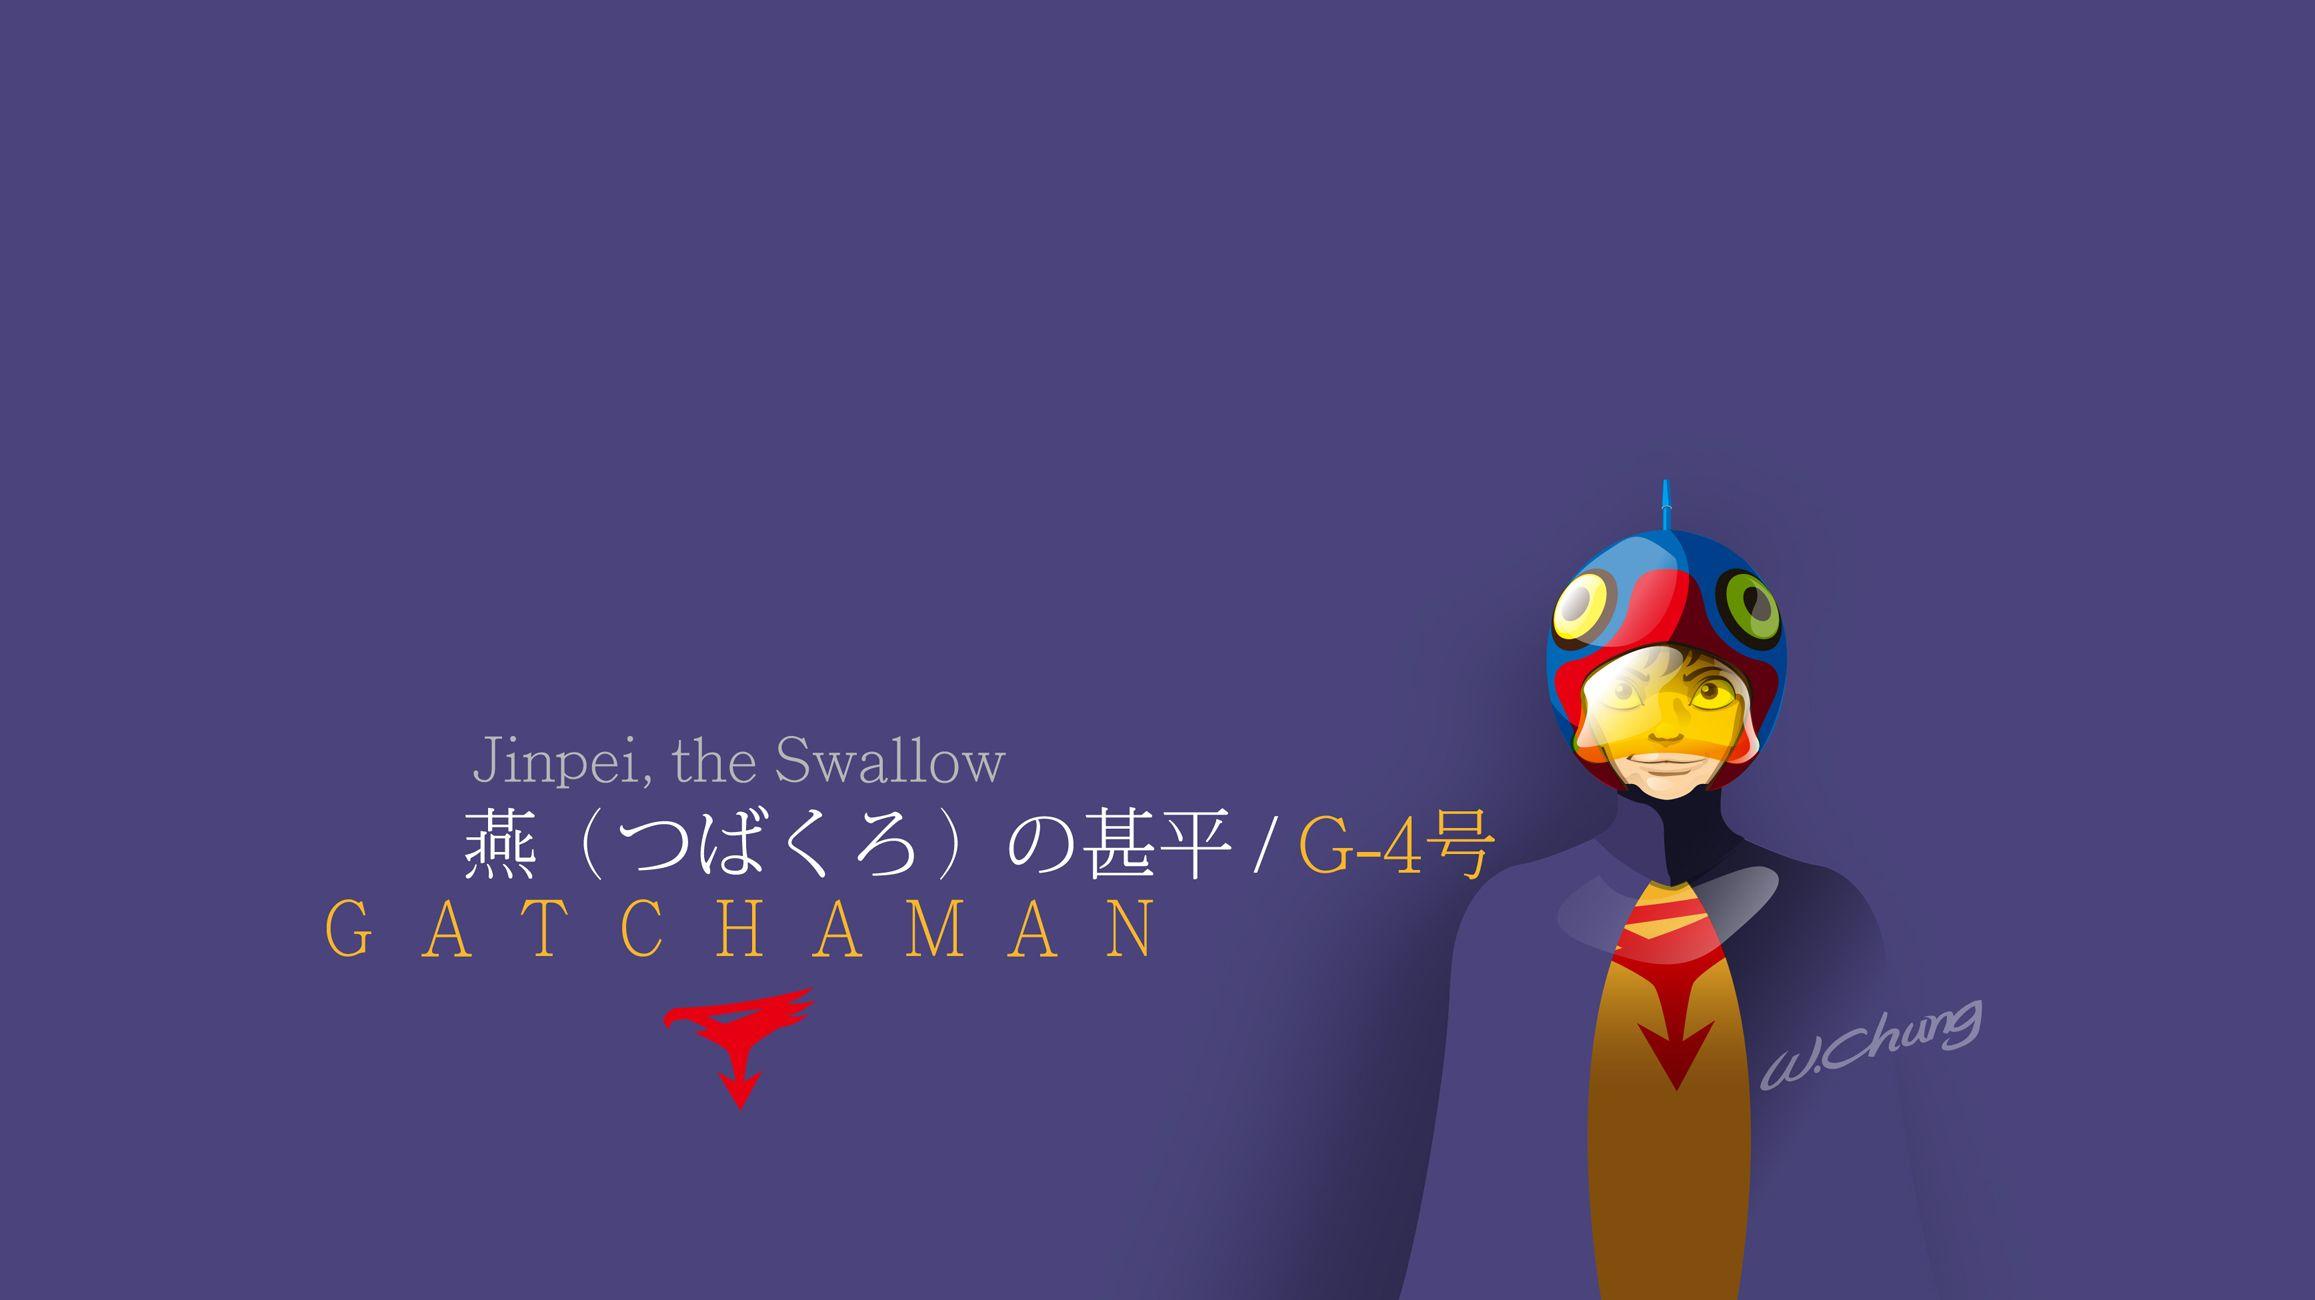 G Force#Battle Of The Planets #Jinpei (甚平) #gatchaman